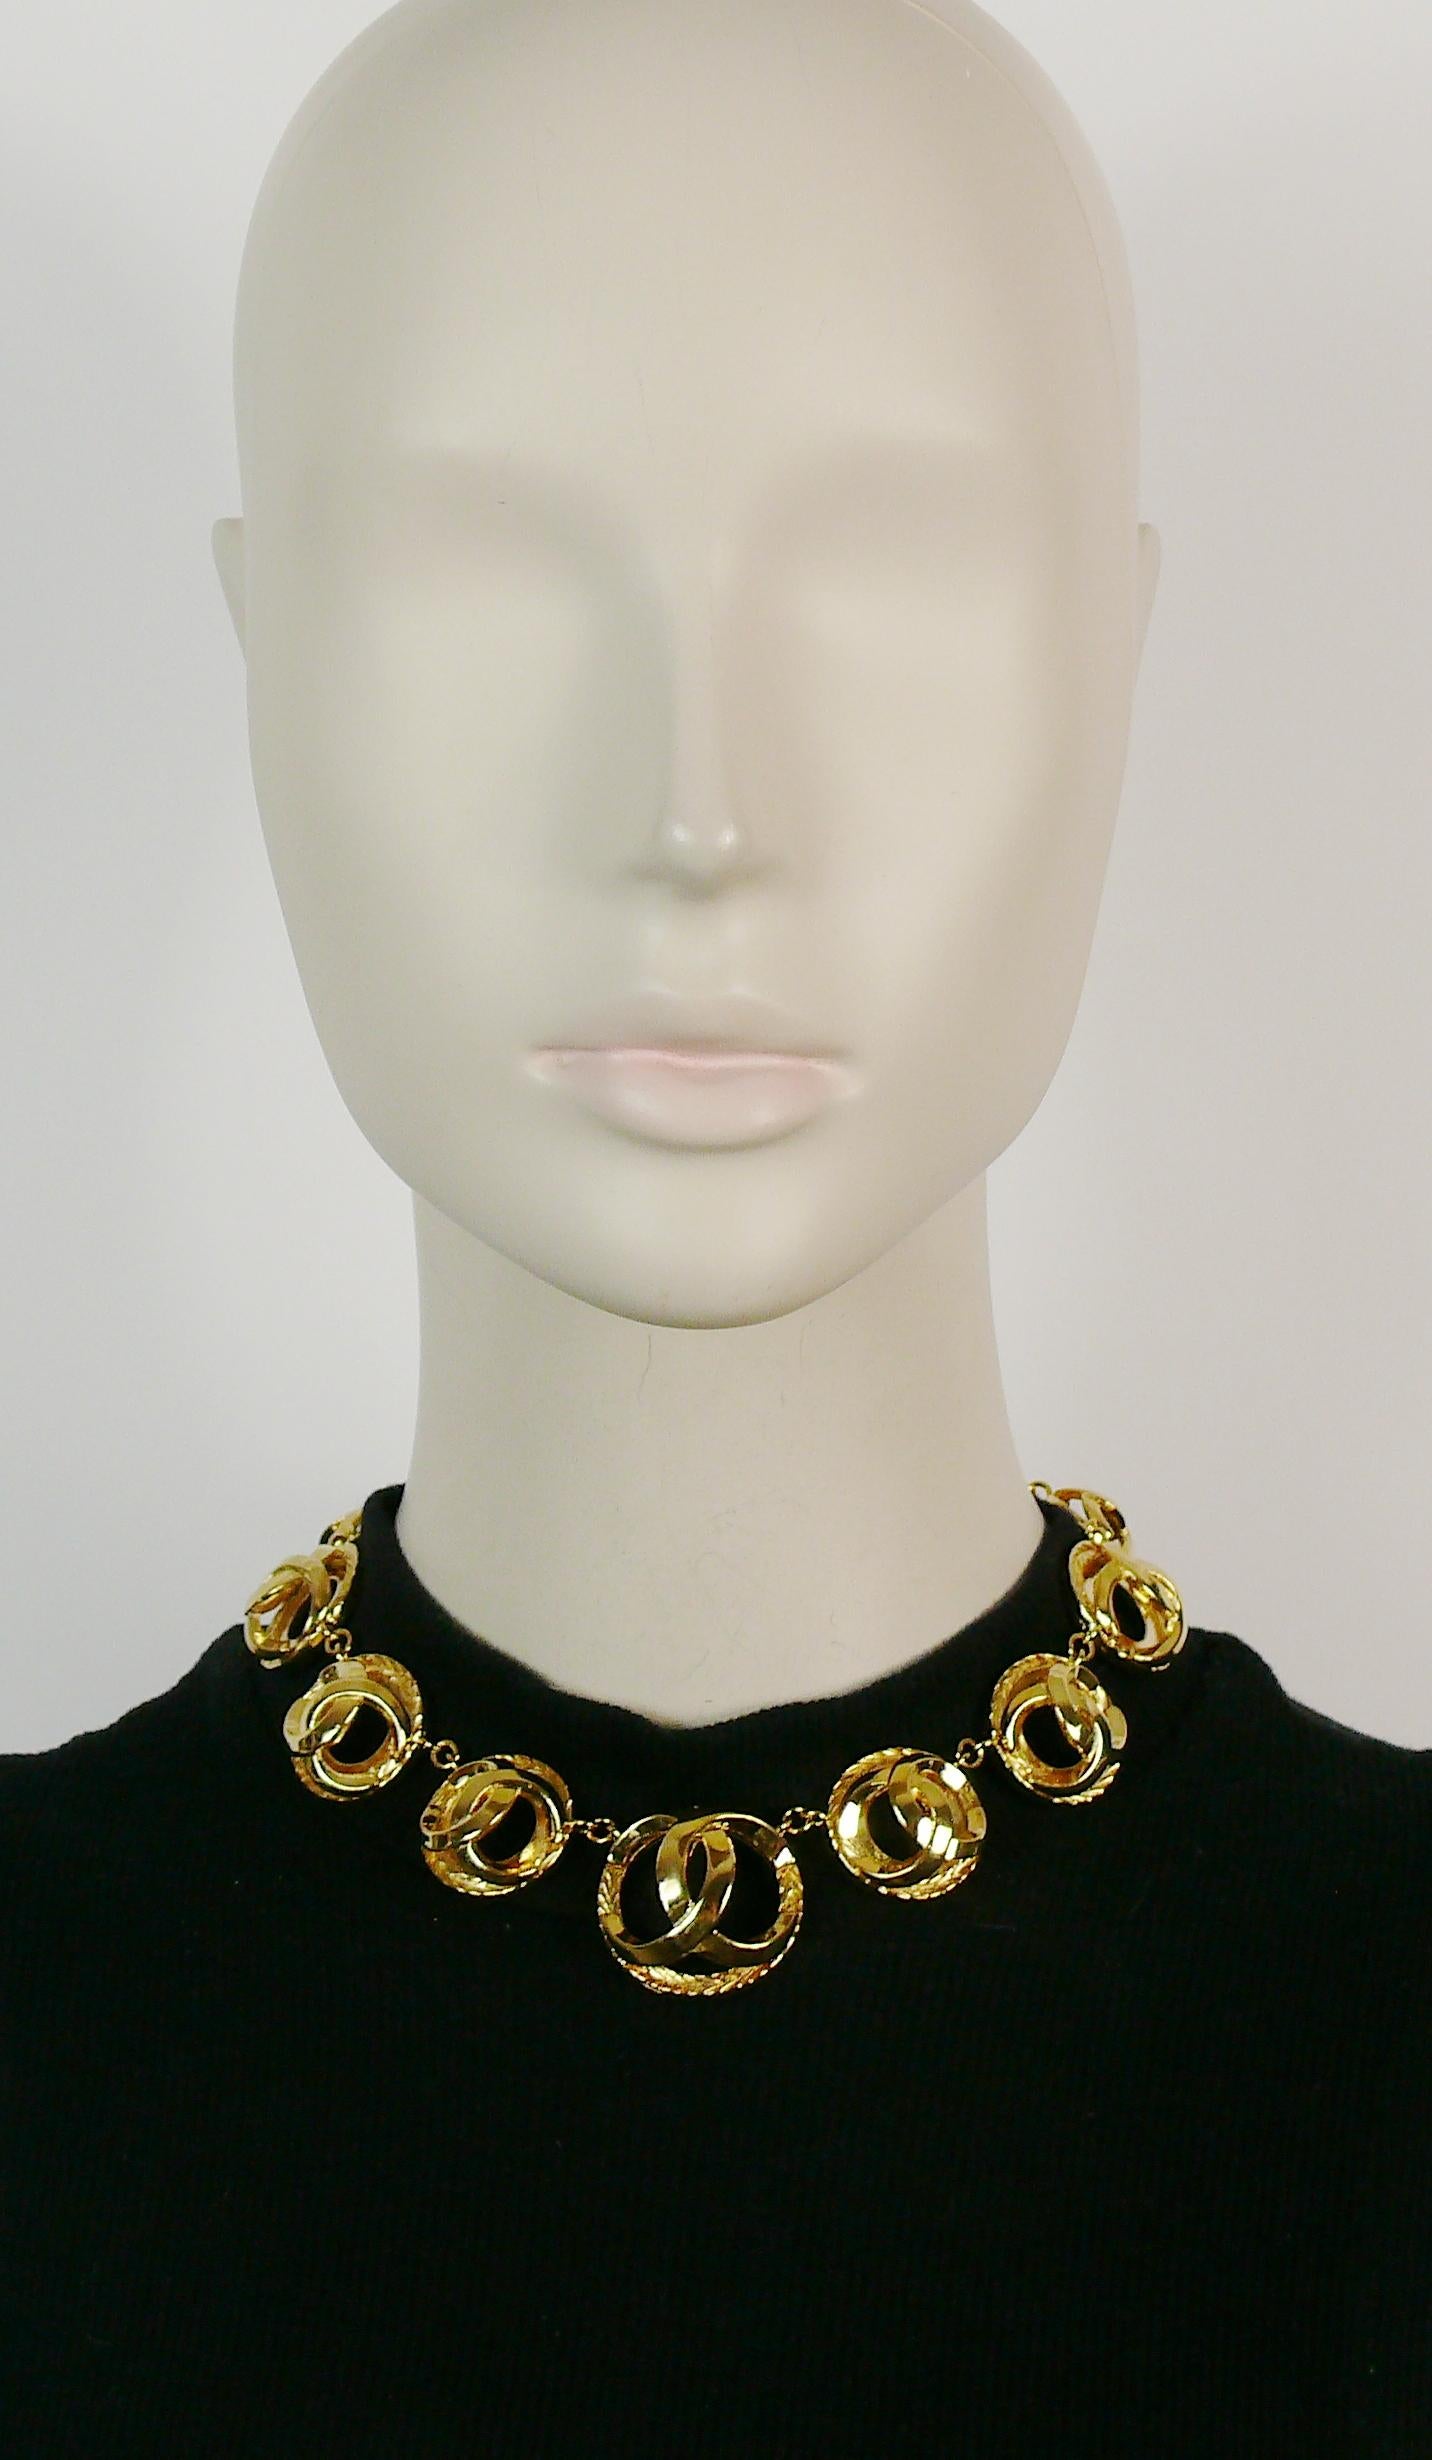 CHANEL vintage gold toned collar necklace featuring graduated domed CC round medallion links.

Spring clasp and toggle closure.

Unmarked.
The CHANEL signature metal plate felt off during re-gilding process.

Indicative measurements : length approx.